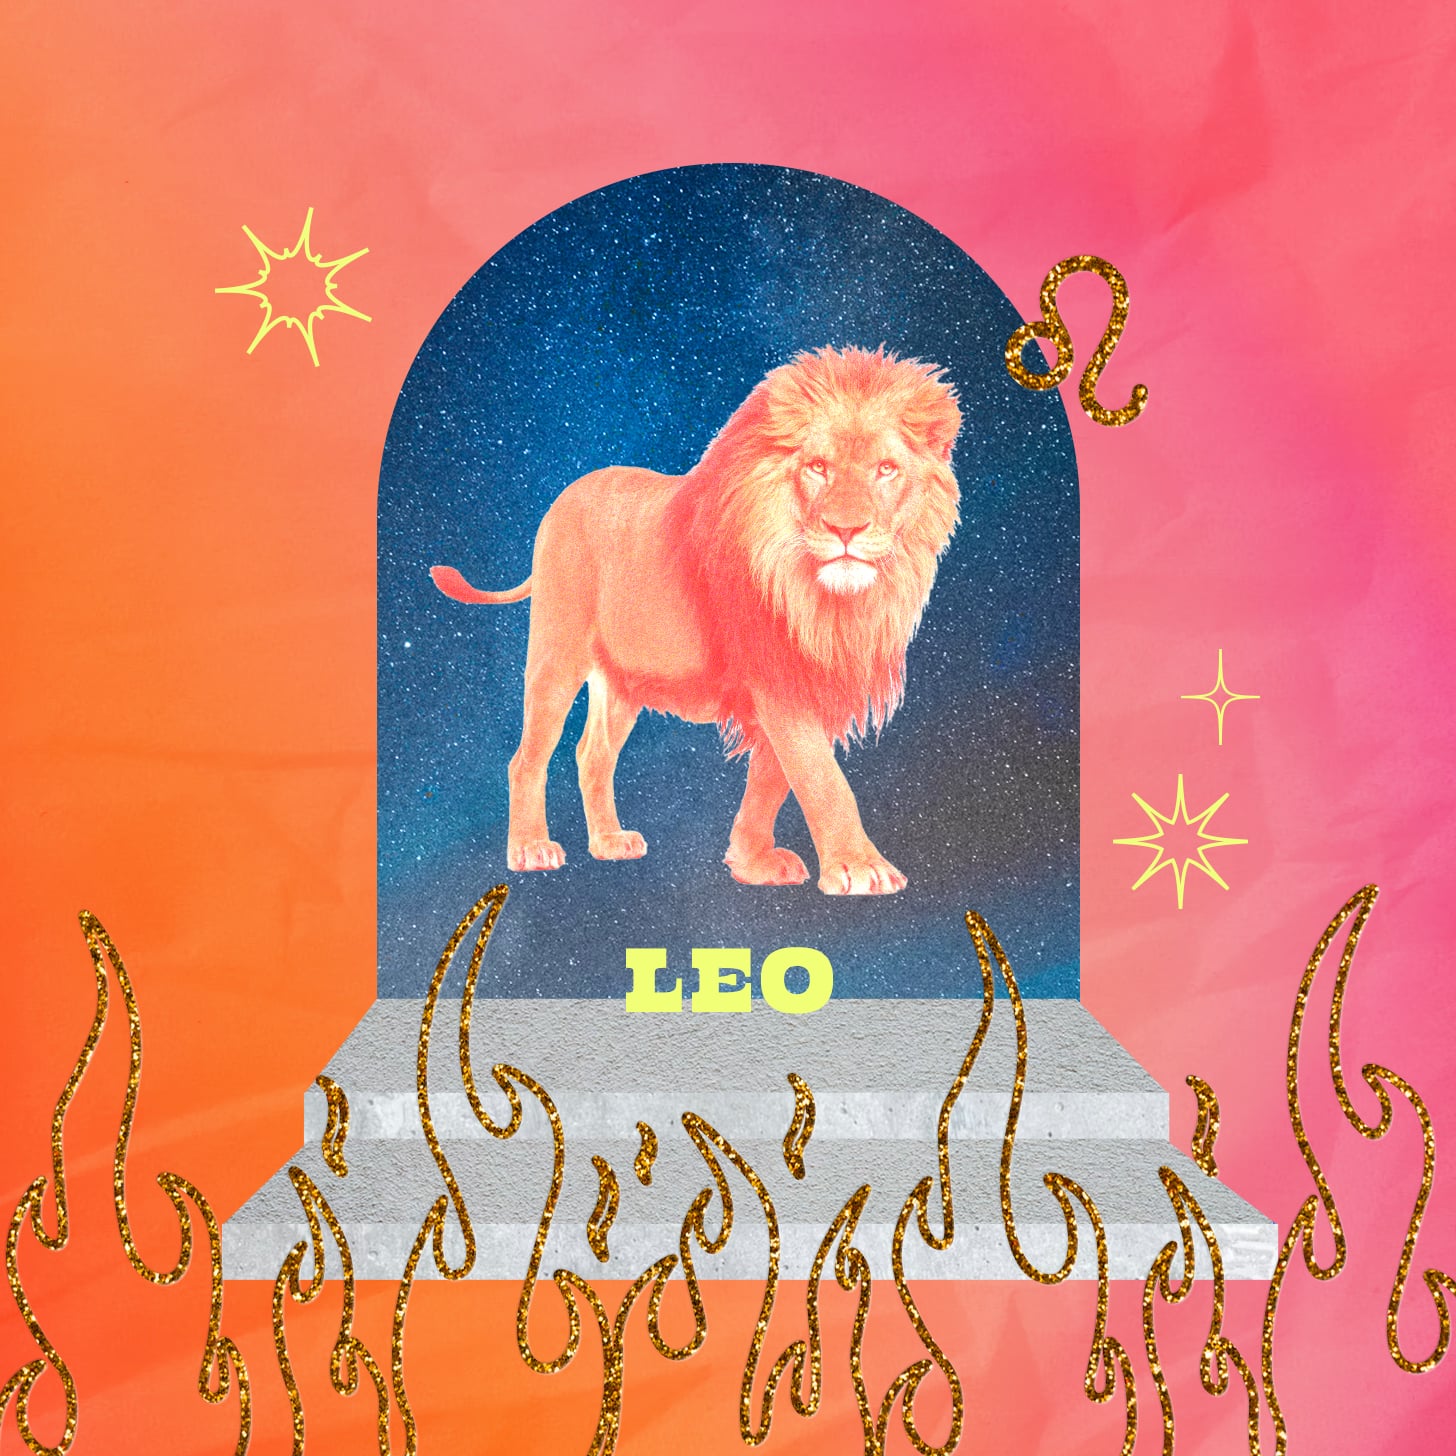 Leo weekly horoscope for August 7-13, 2022